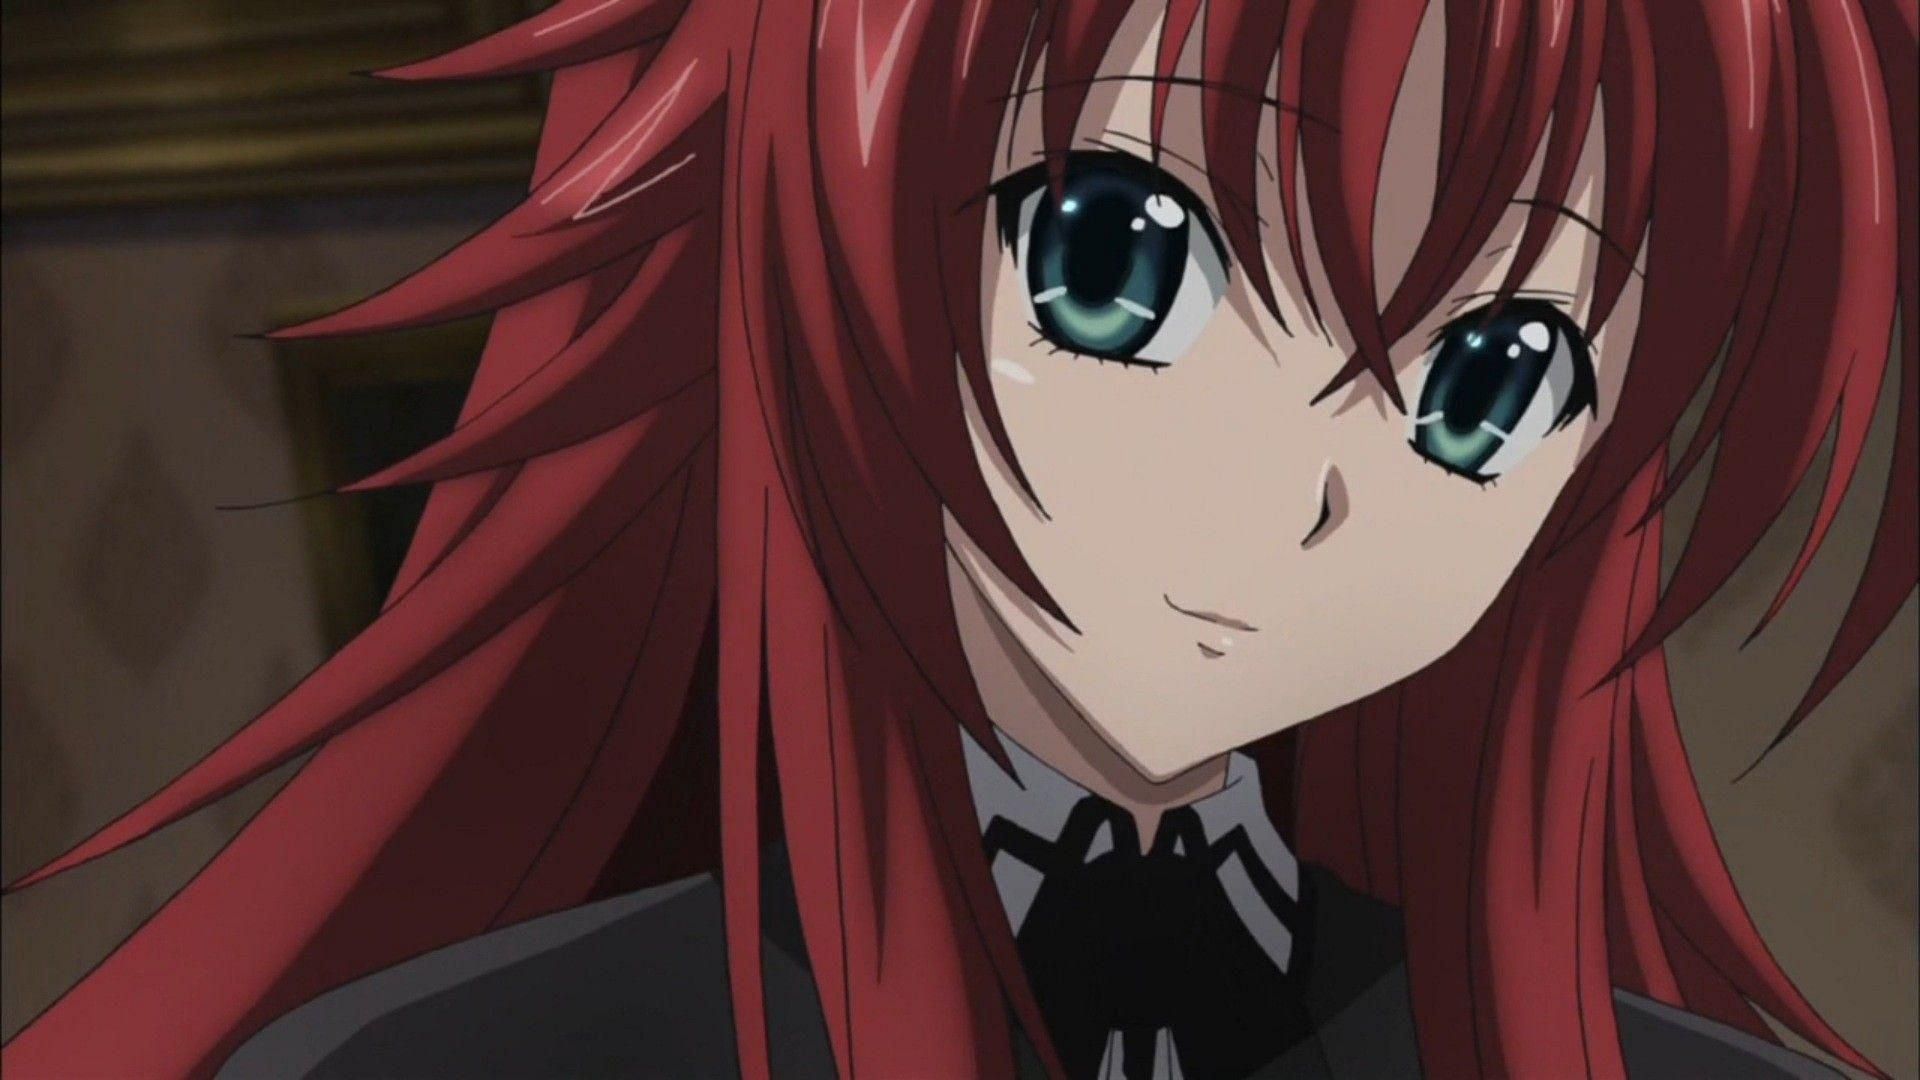 A snapshot of Rias Gremory from the series (Image via TNK Animation Studios)